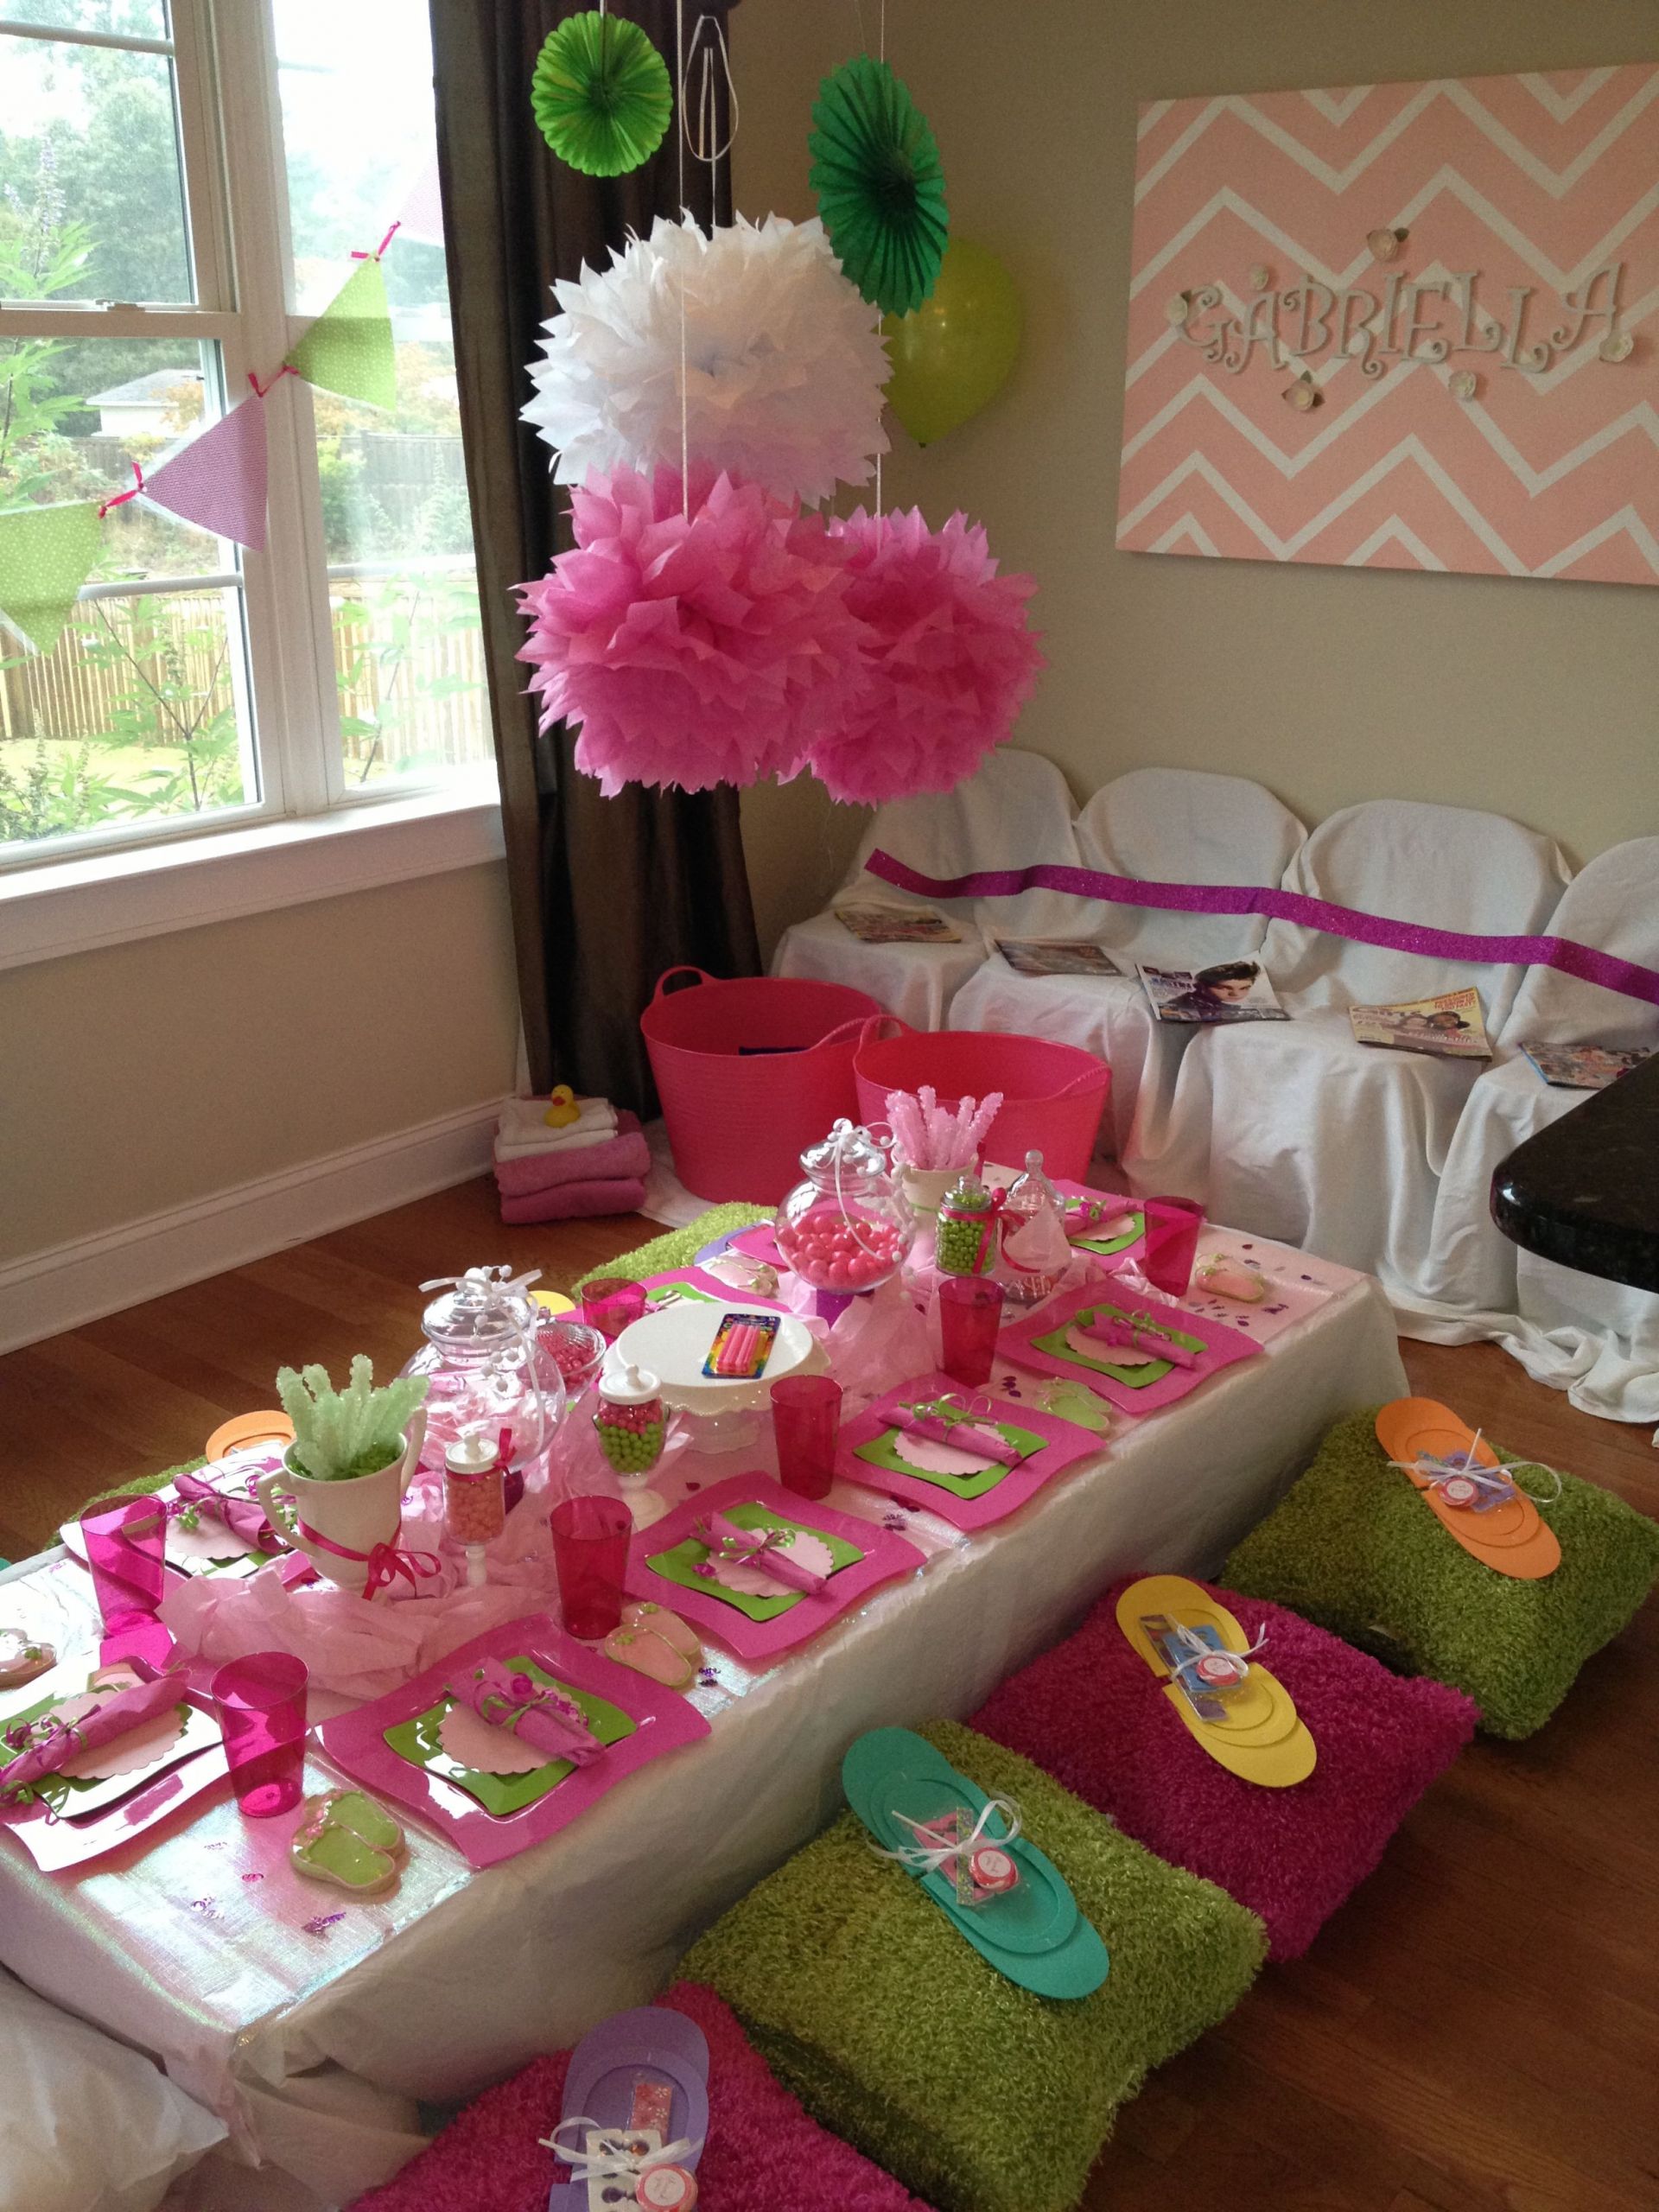 Kids Spa Party Ideas
 My daughters spa party in 2019